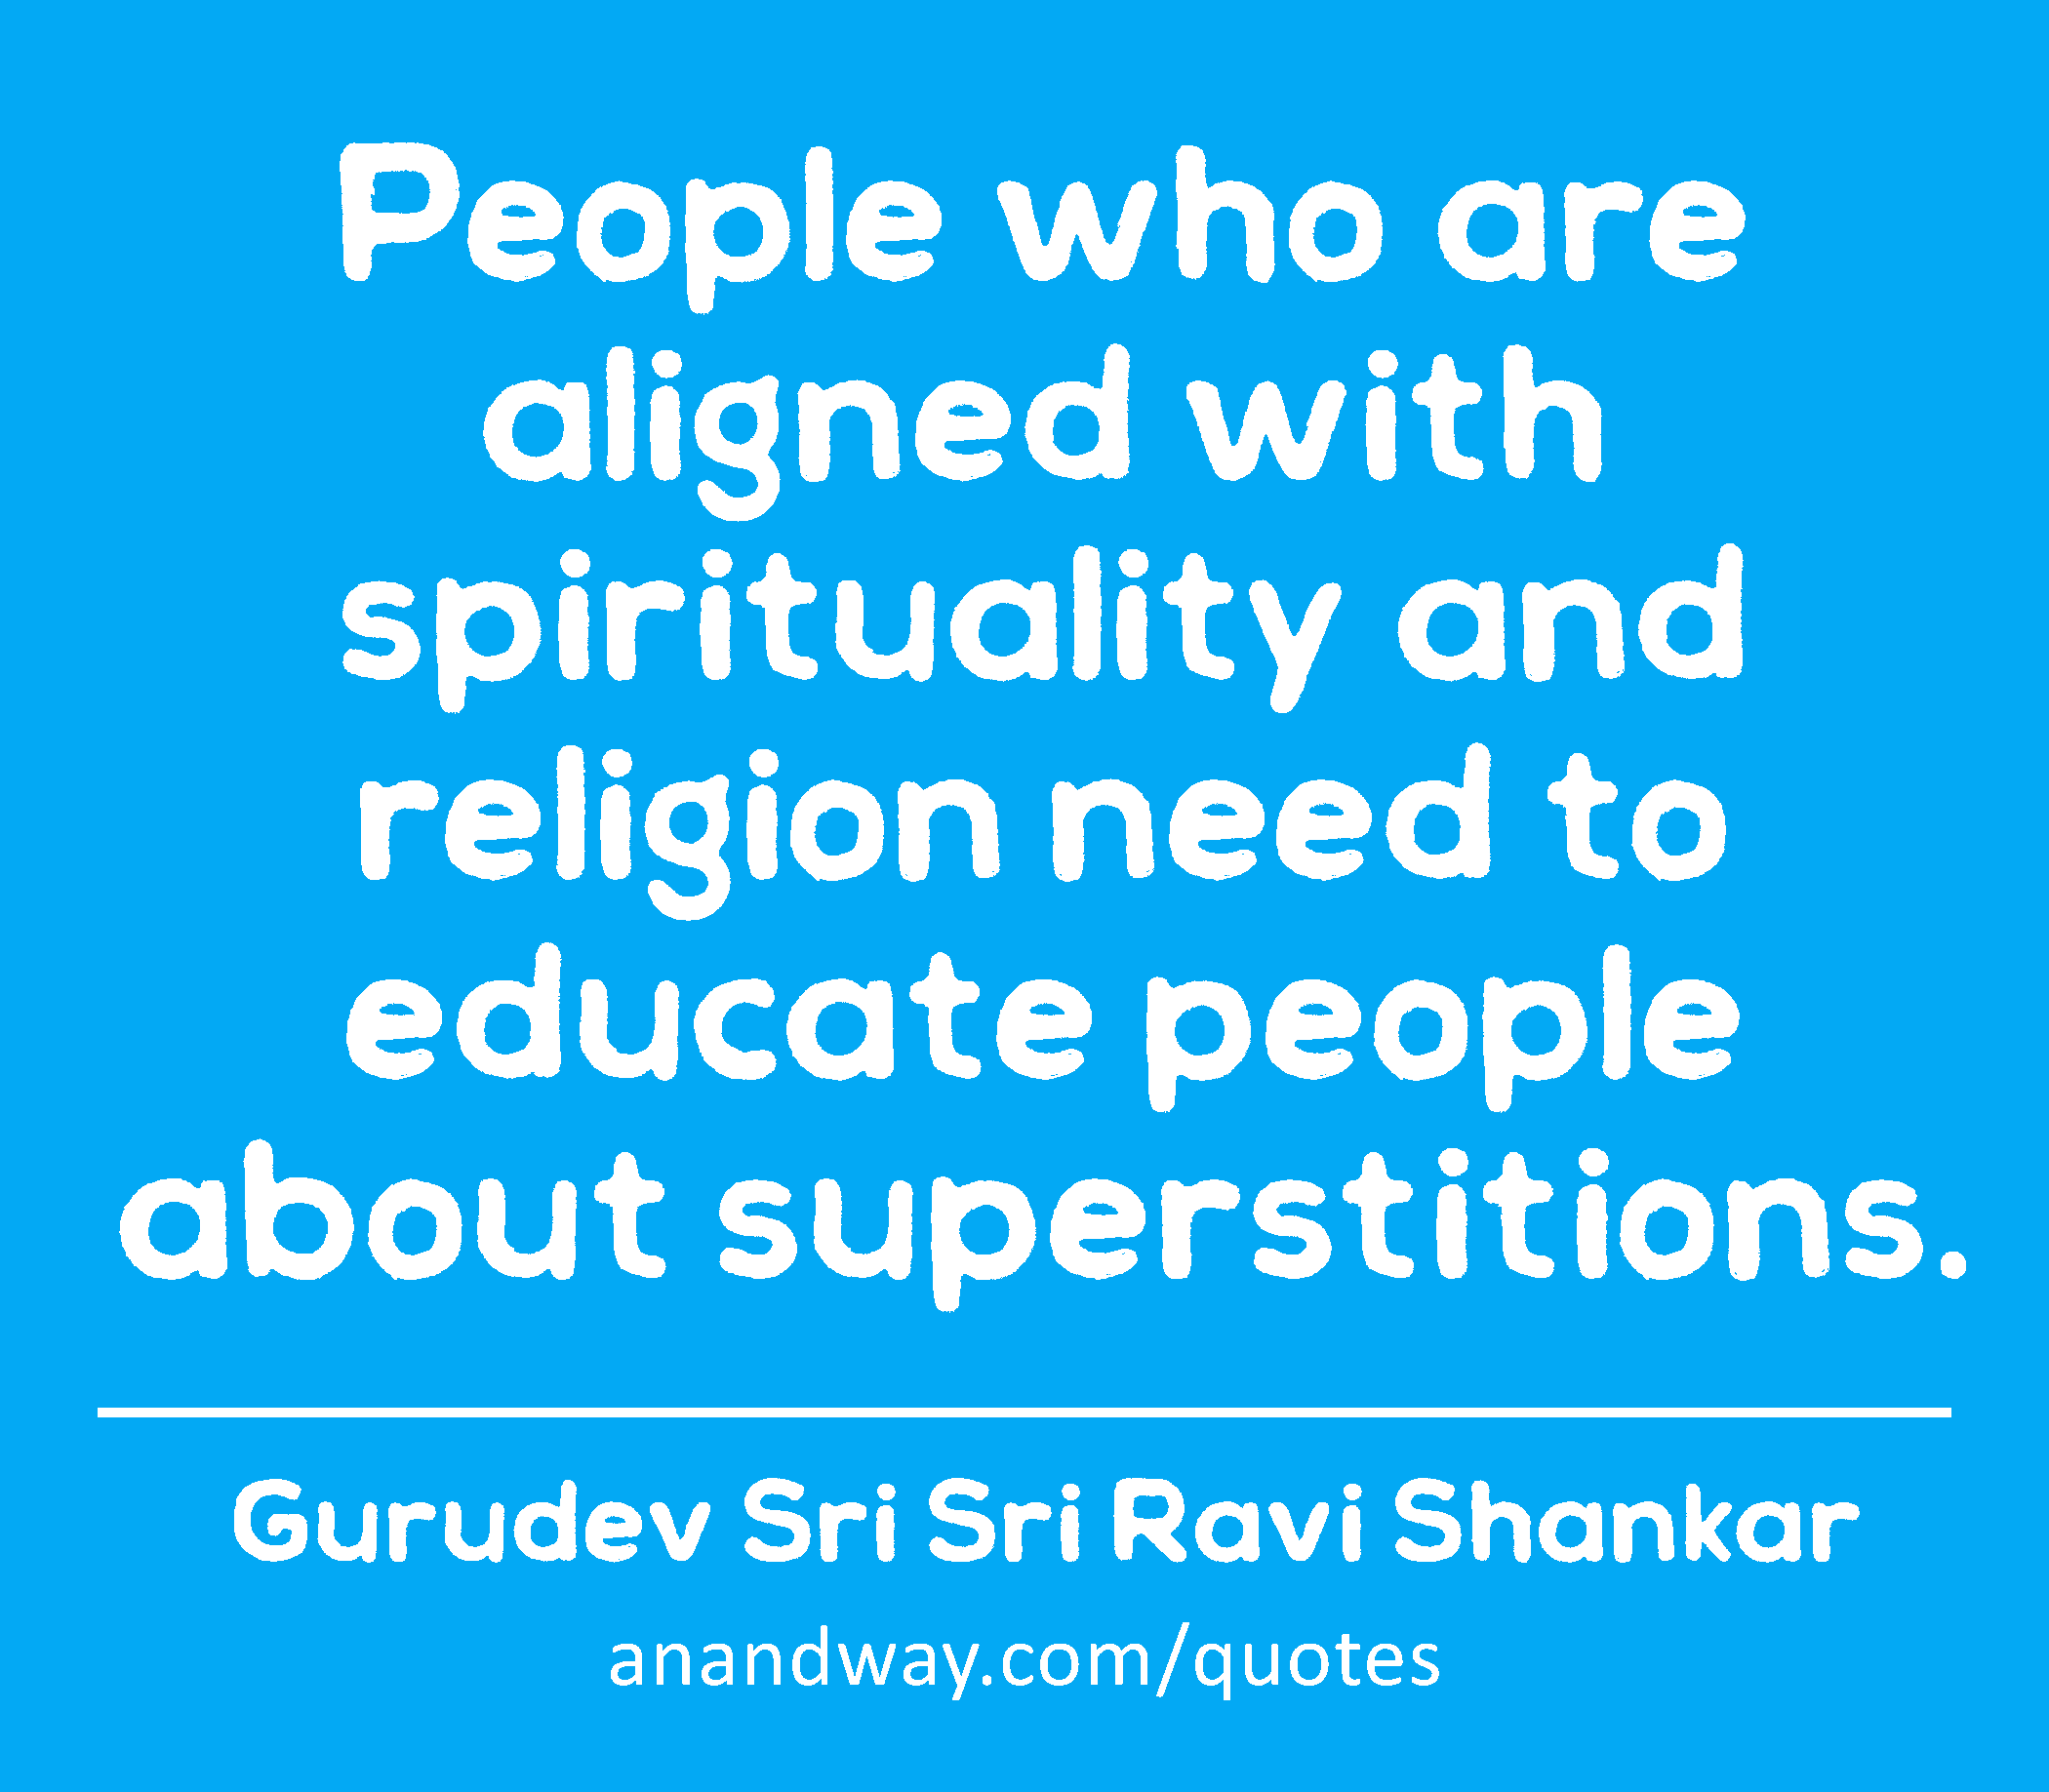 People who are aligned with spirituality and religion need to educate people about superstitions. 
 -Gurudev Sri Sri Ravi Shankar